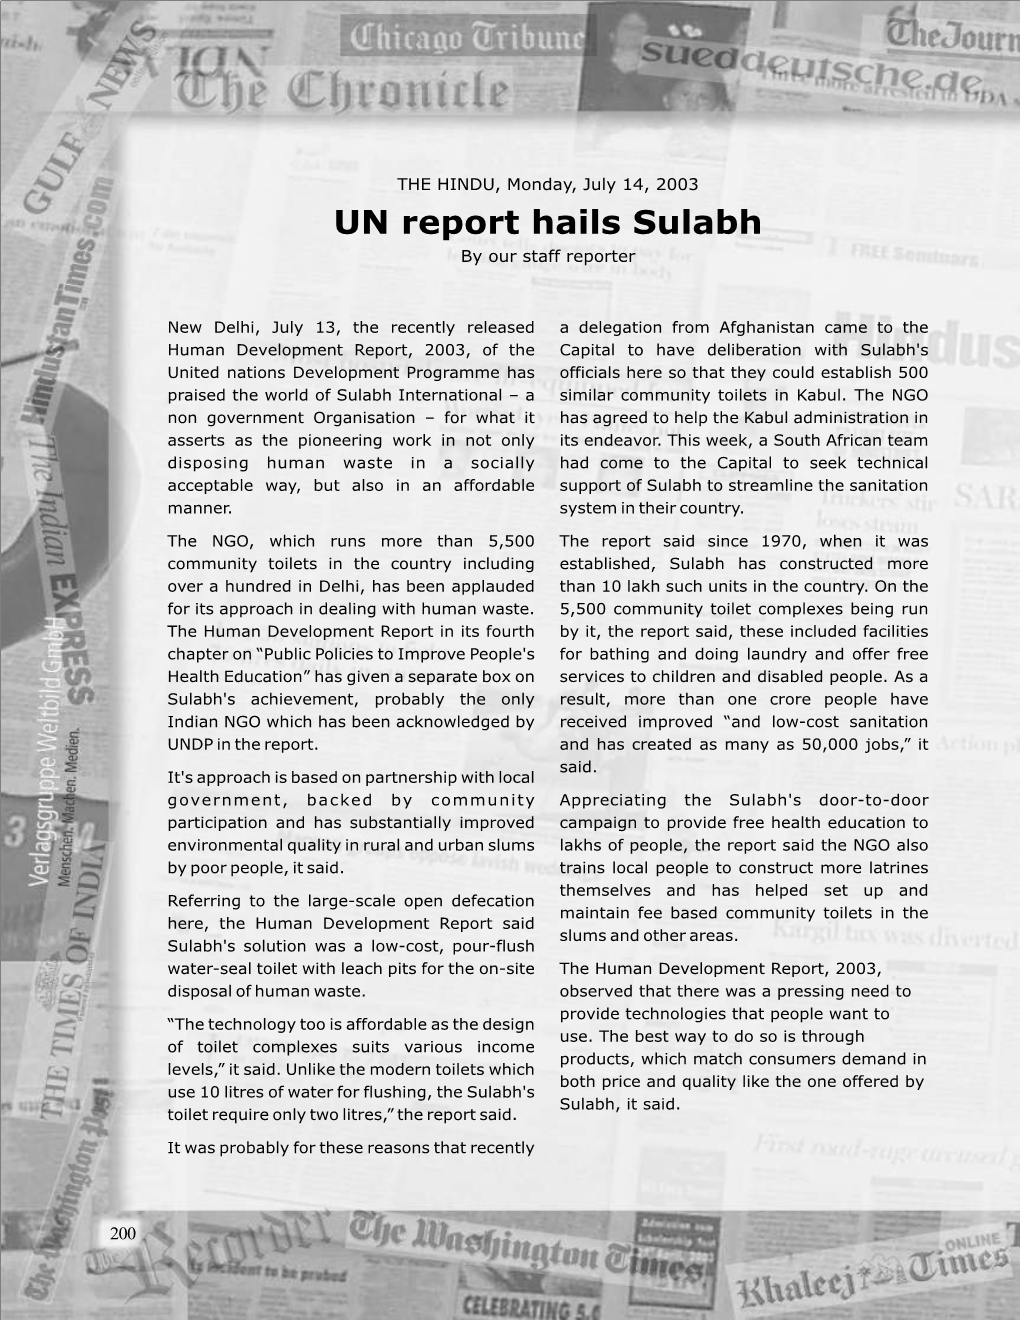 UN Report Hails Sulabh by Our Staff Reporter